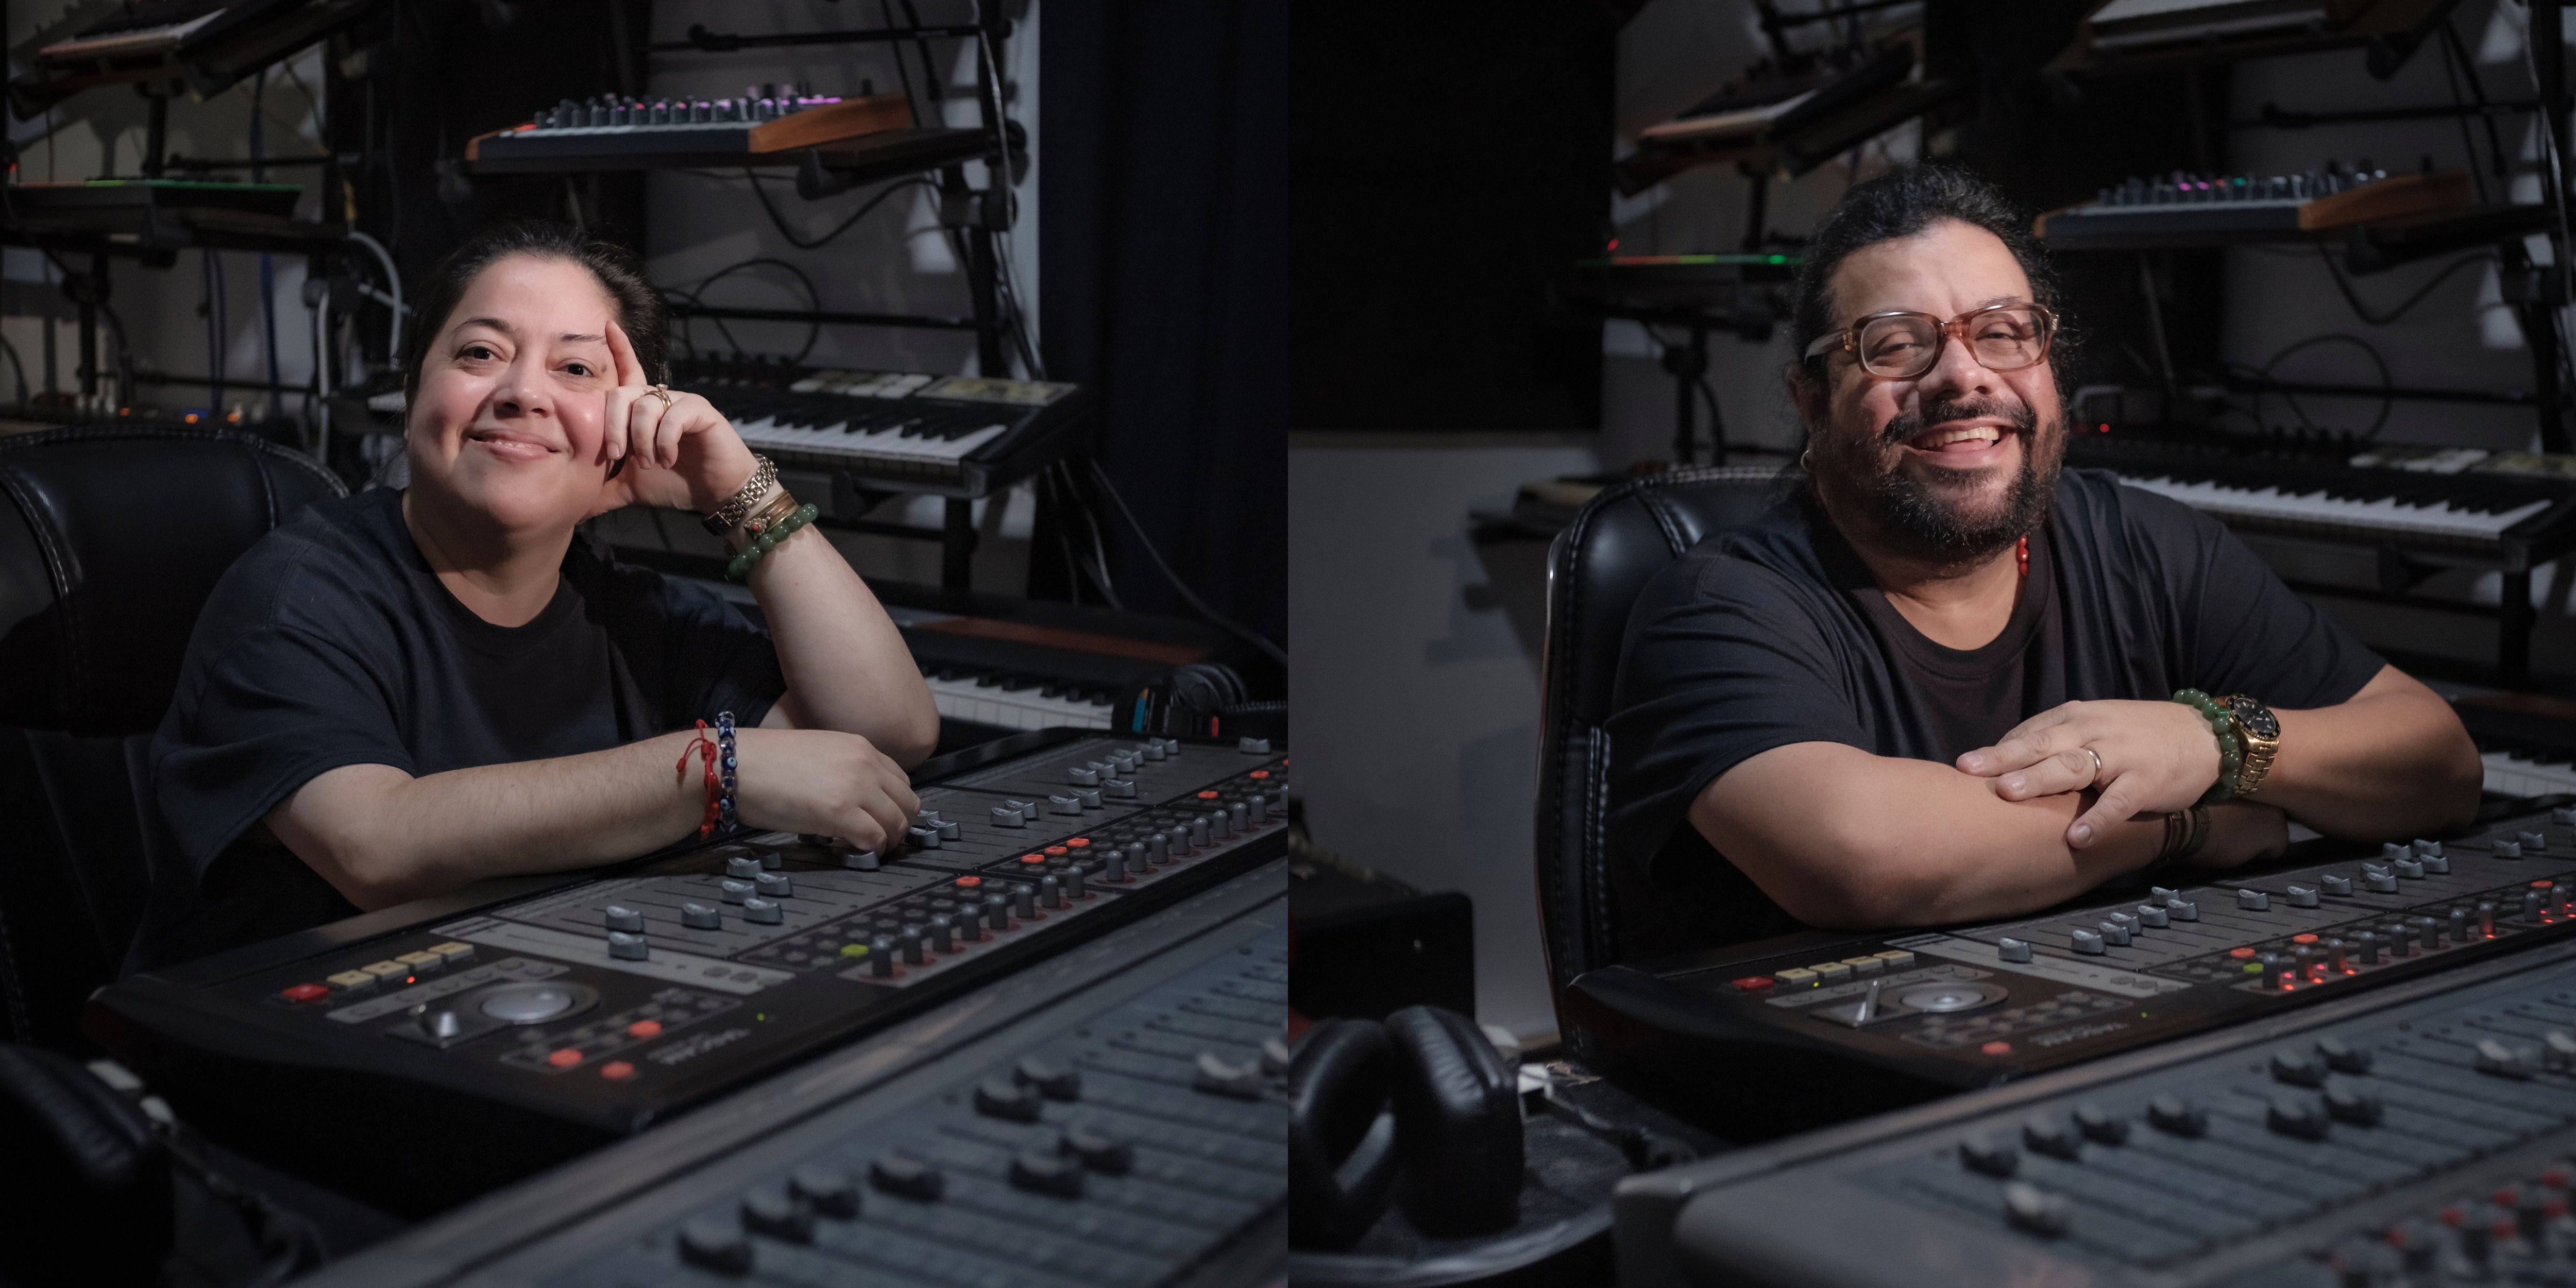 Antonio Vergara and Claudia Correa Nominated for the Latin Grammy for Their Mixing and Mastering Work